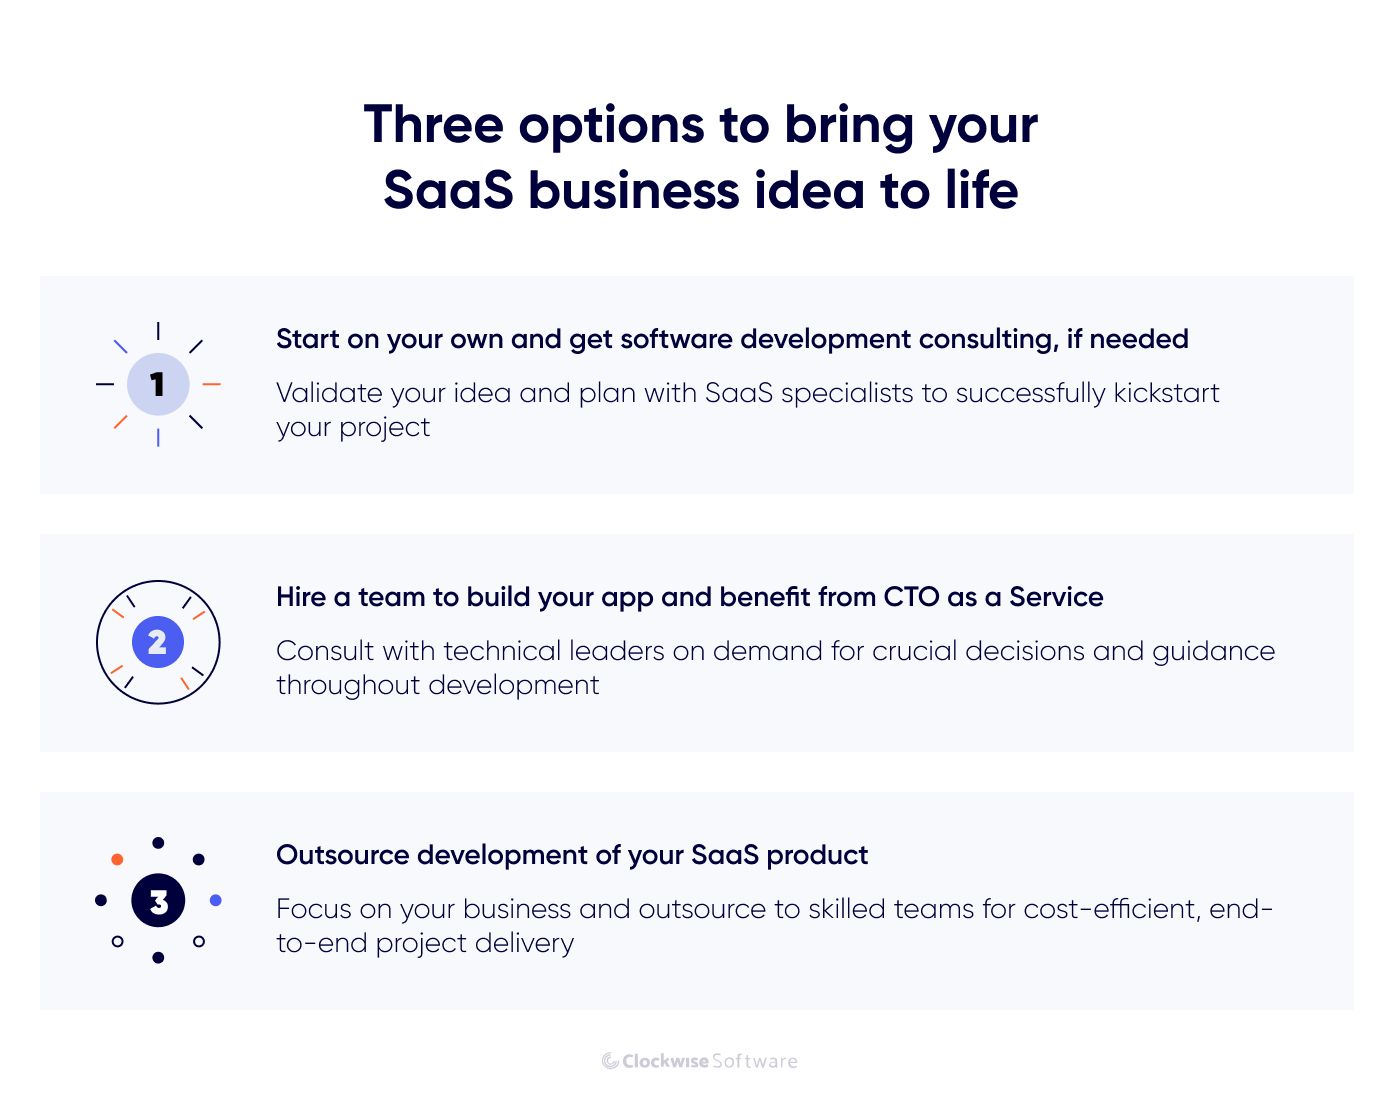 3 options to bring your saas idea to life